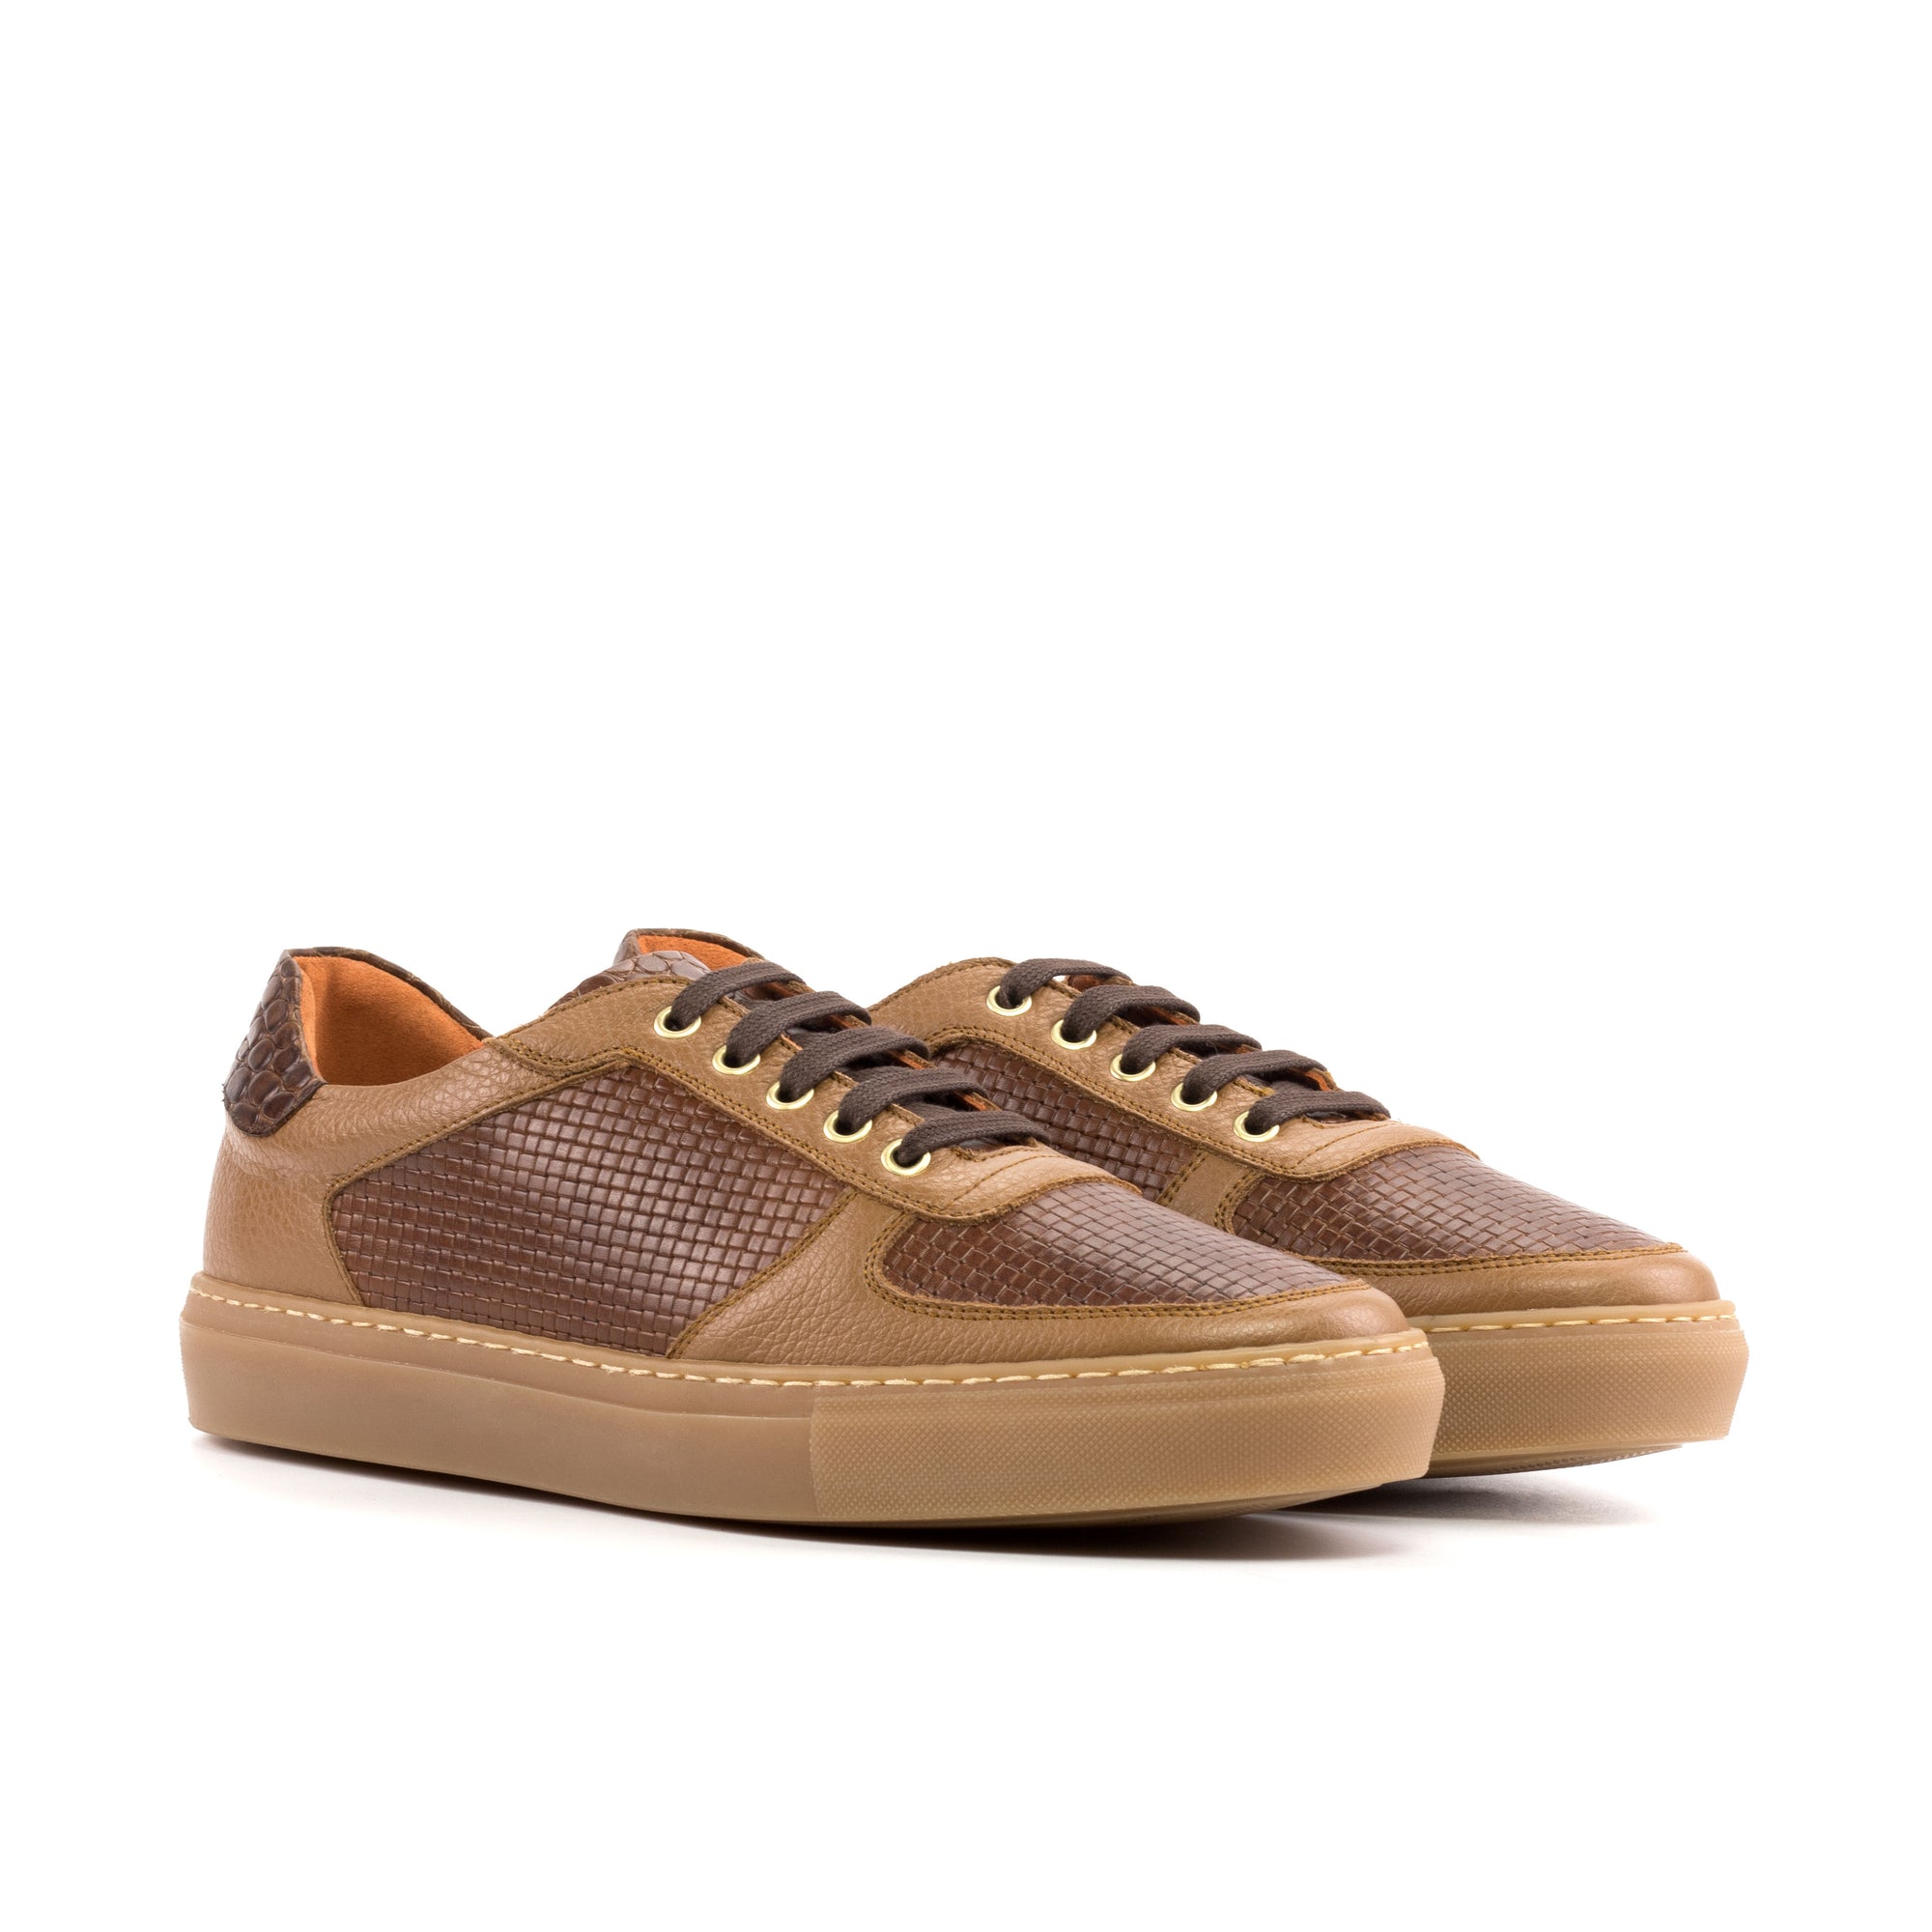 Handmade Cupsole Sneaker in Tan and Cognac Leather